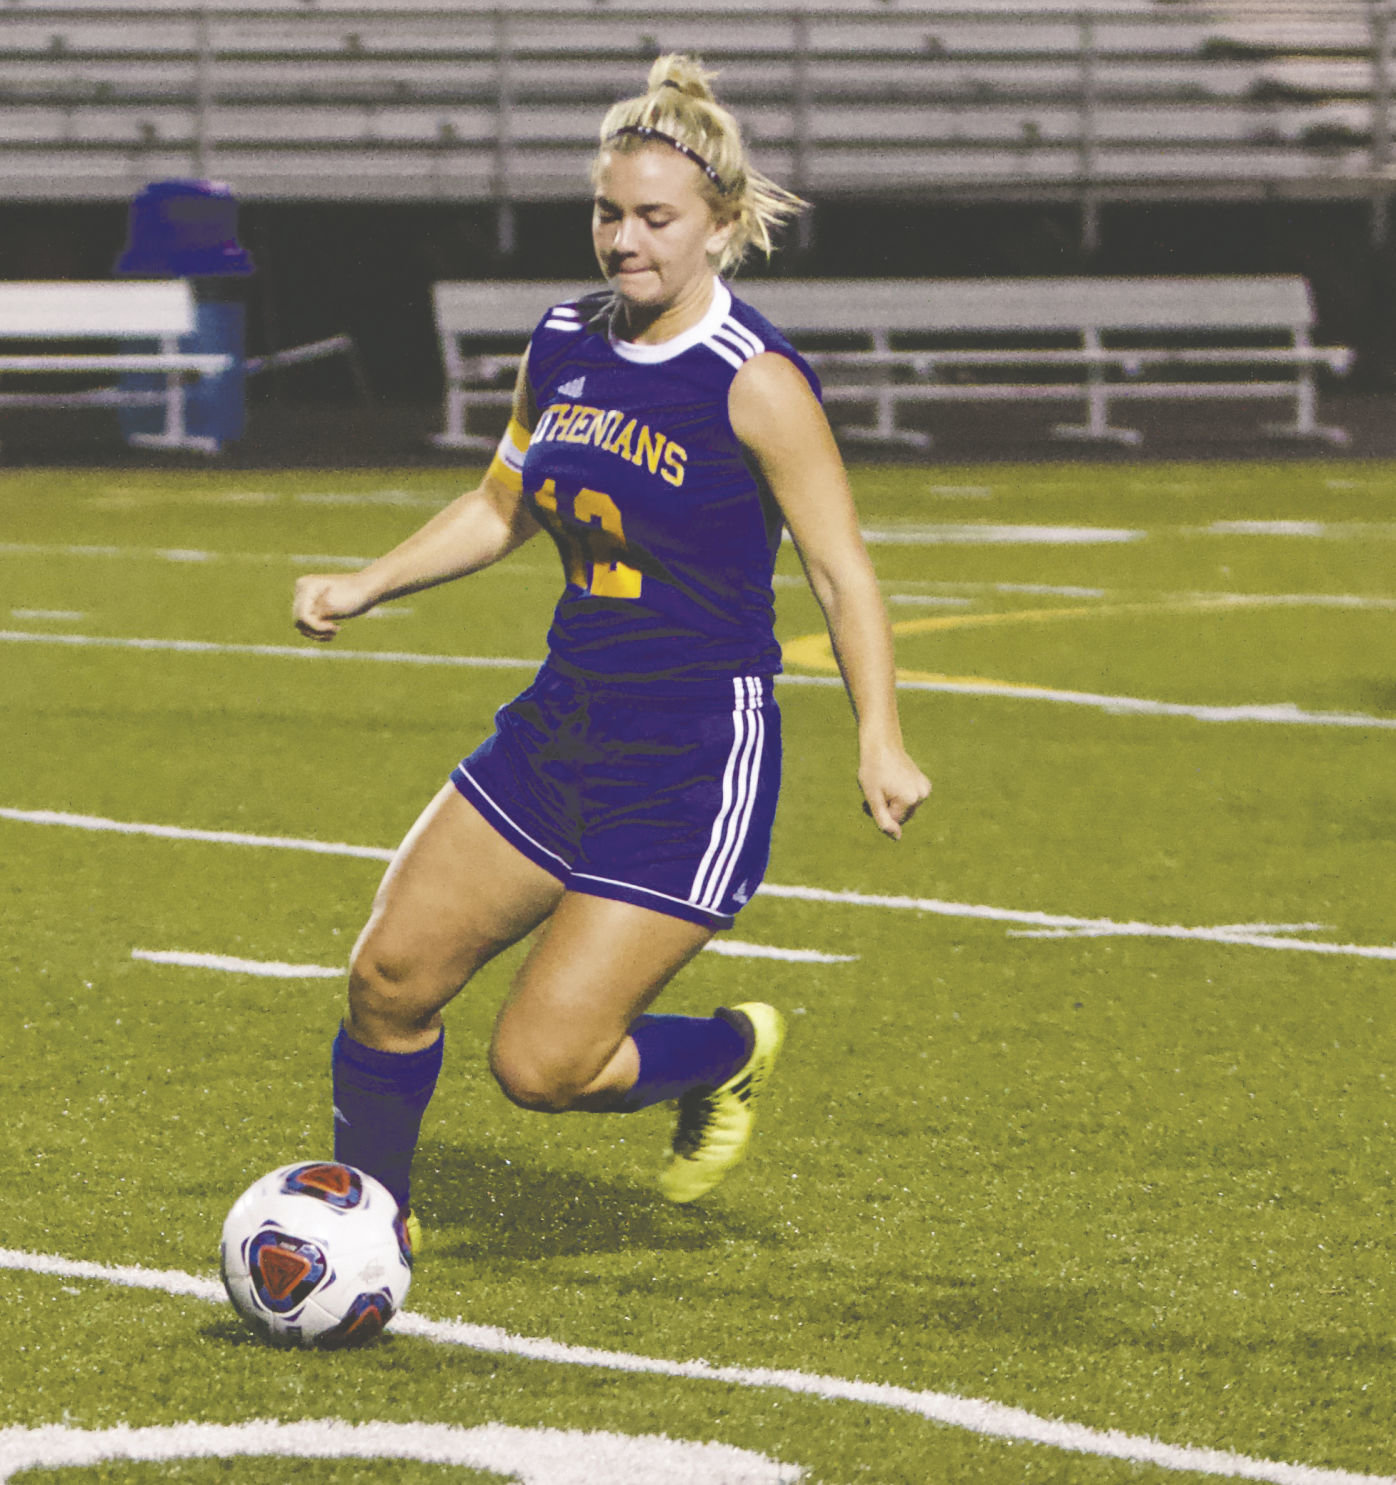 Crawfordsville's Faith Rogers possesses the ball in the Athenian's season-ending loss to Tri-West on Thursday.